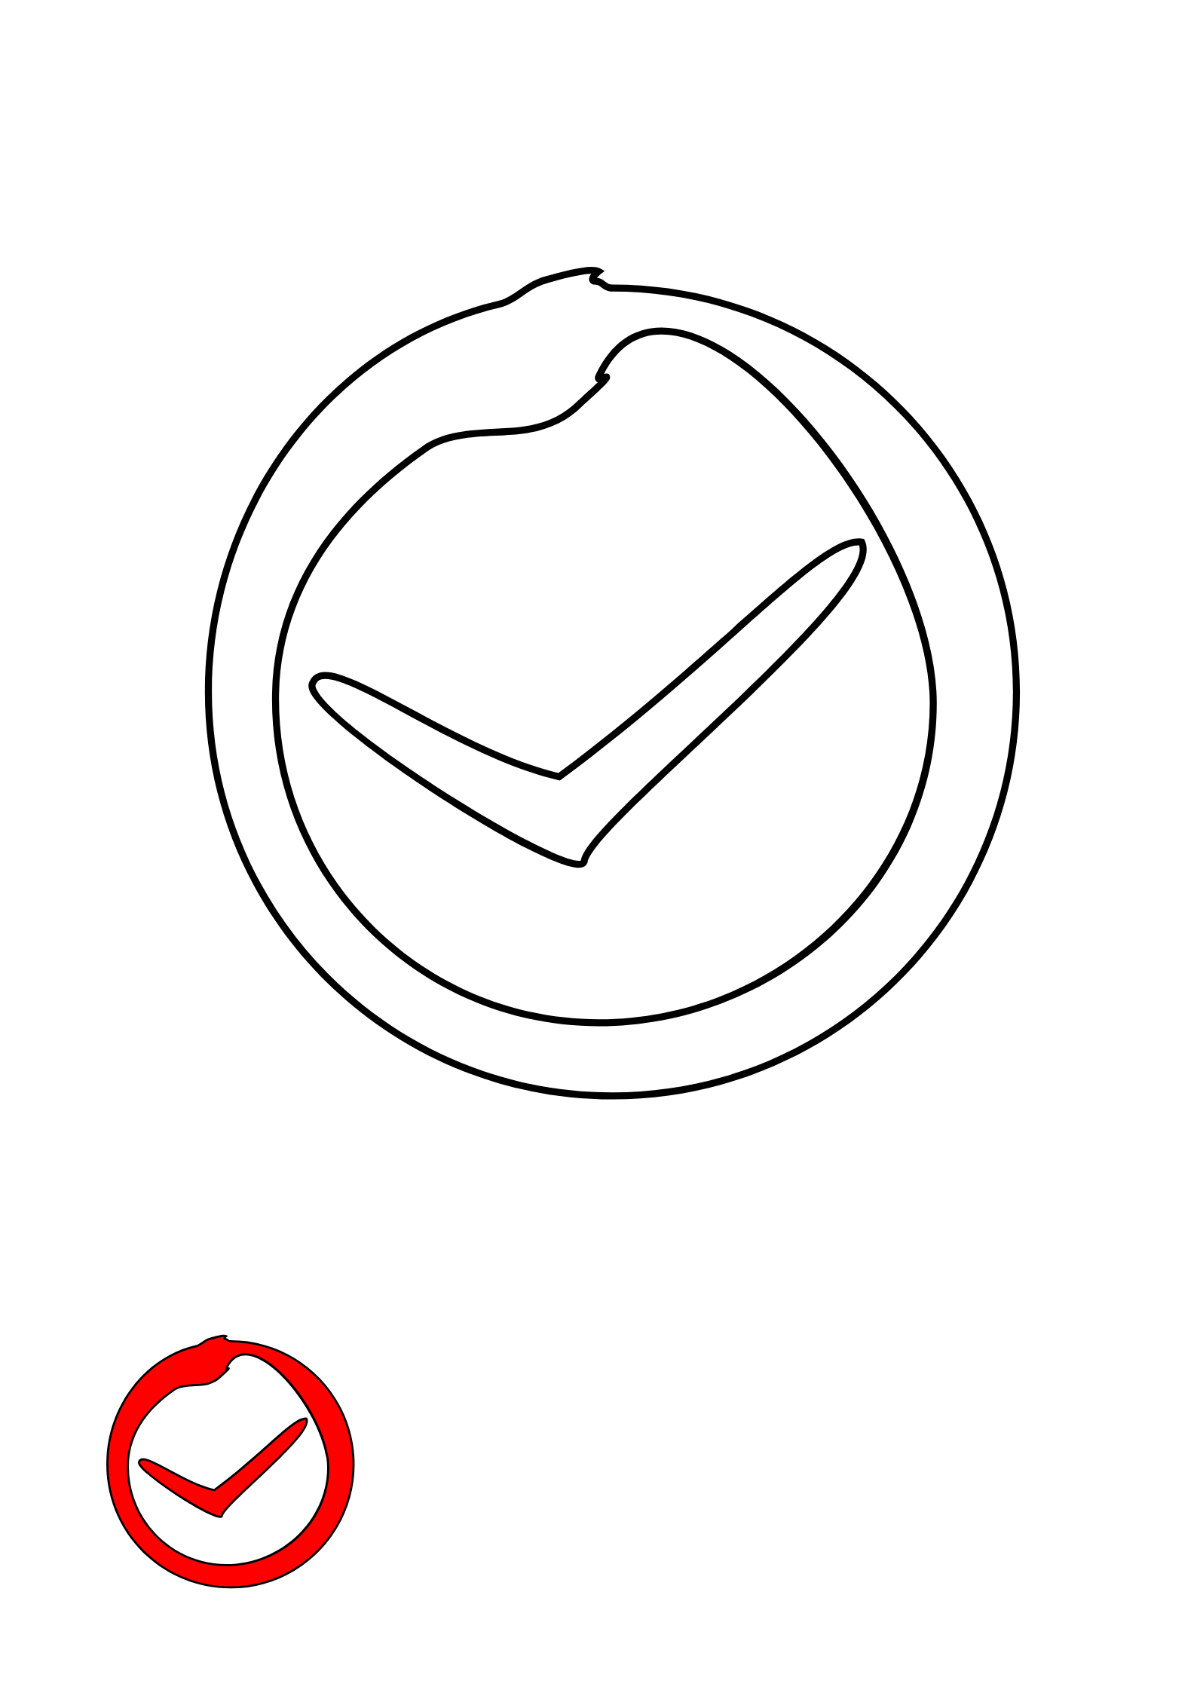 Check Mark Doodle coloring page Template